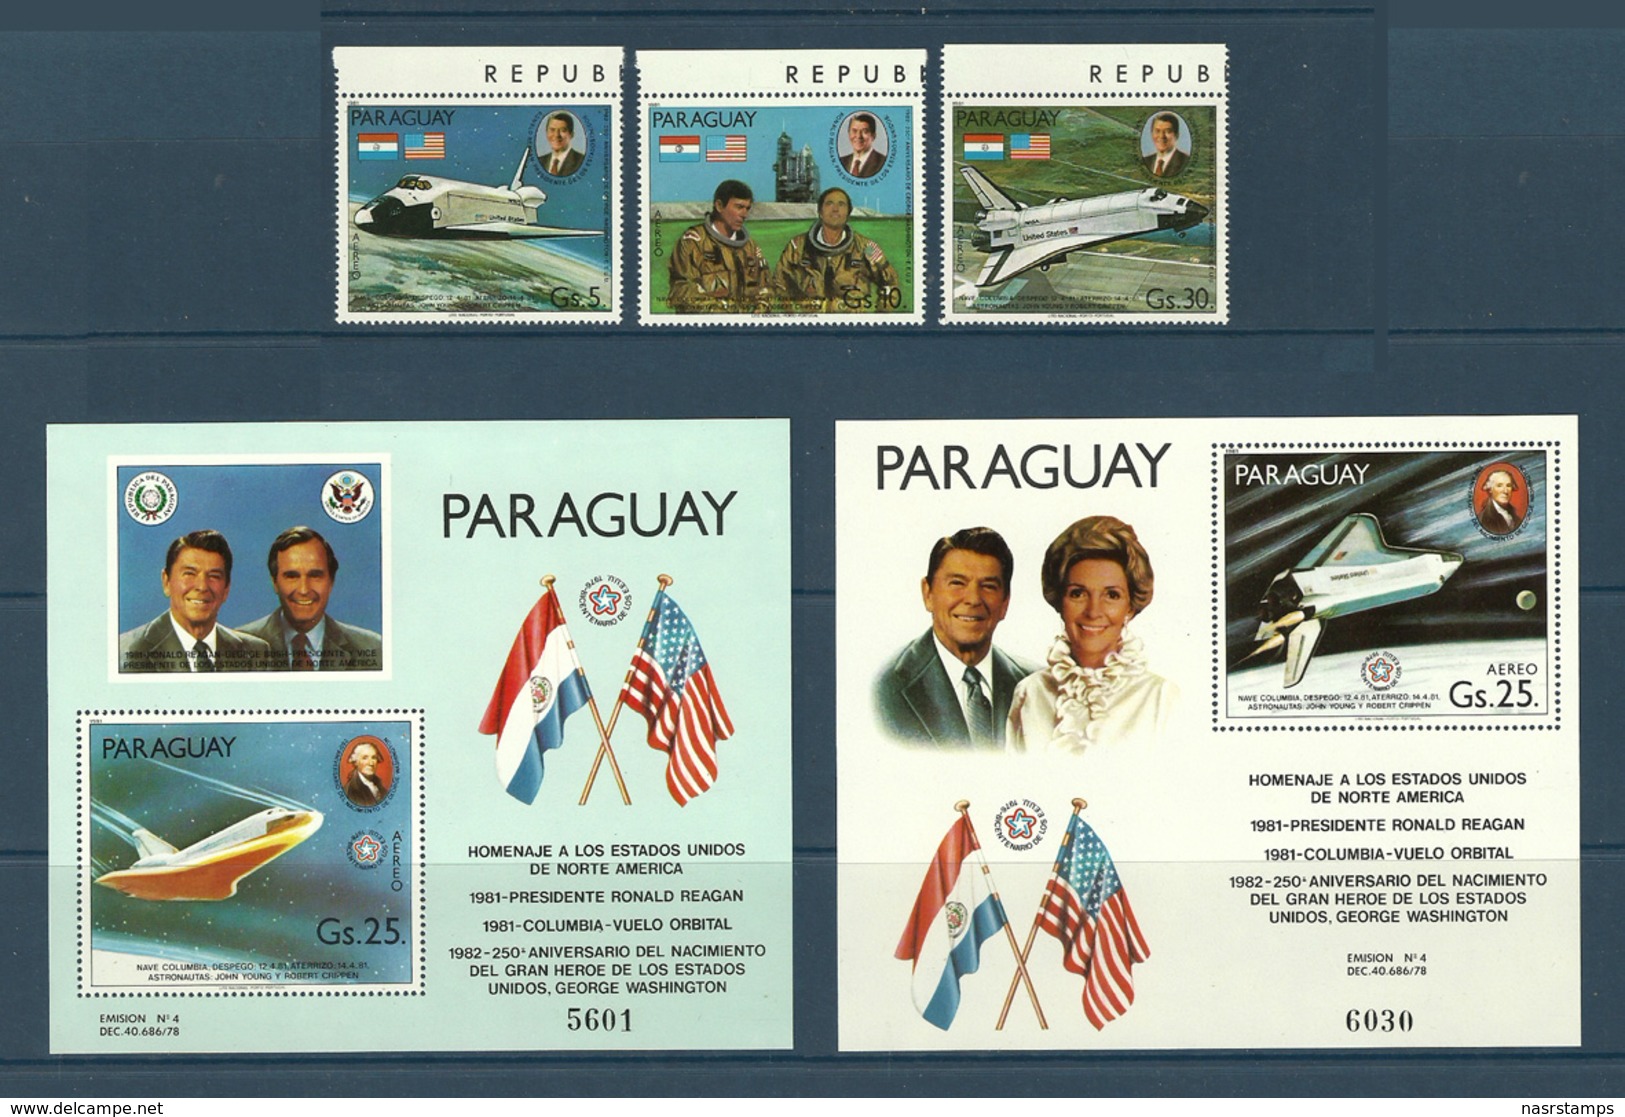 Paraguay - 1981 - ( Pres. Ronald Reagan - First Space Shuttle Mission ) - Complete Set & 2 M/S - MNH (**) - Paraguay